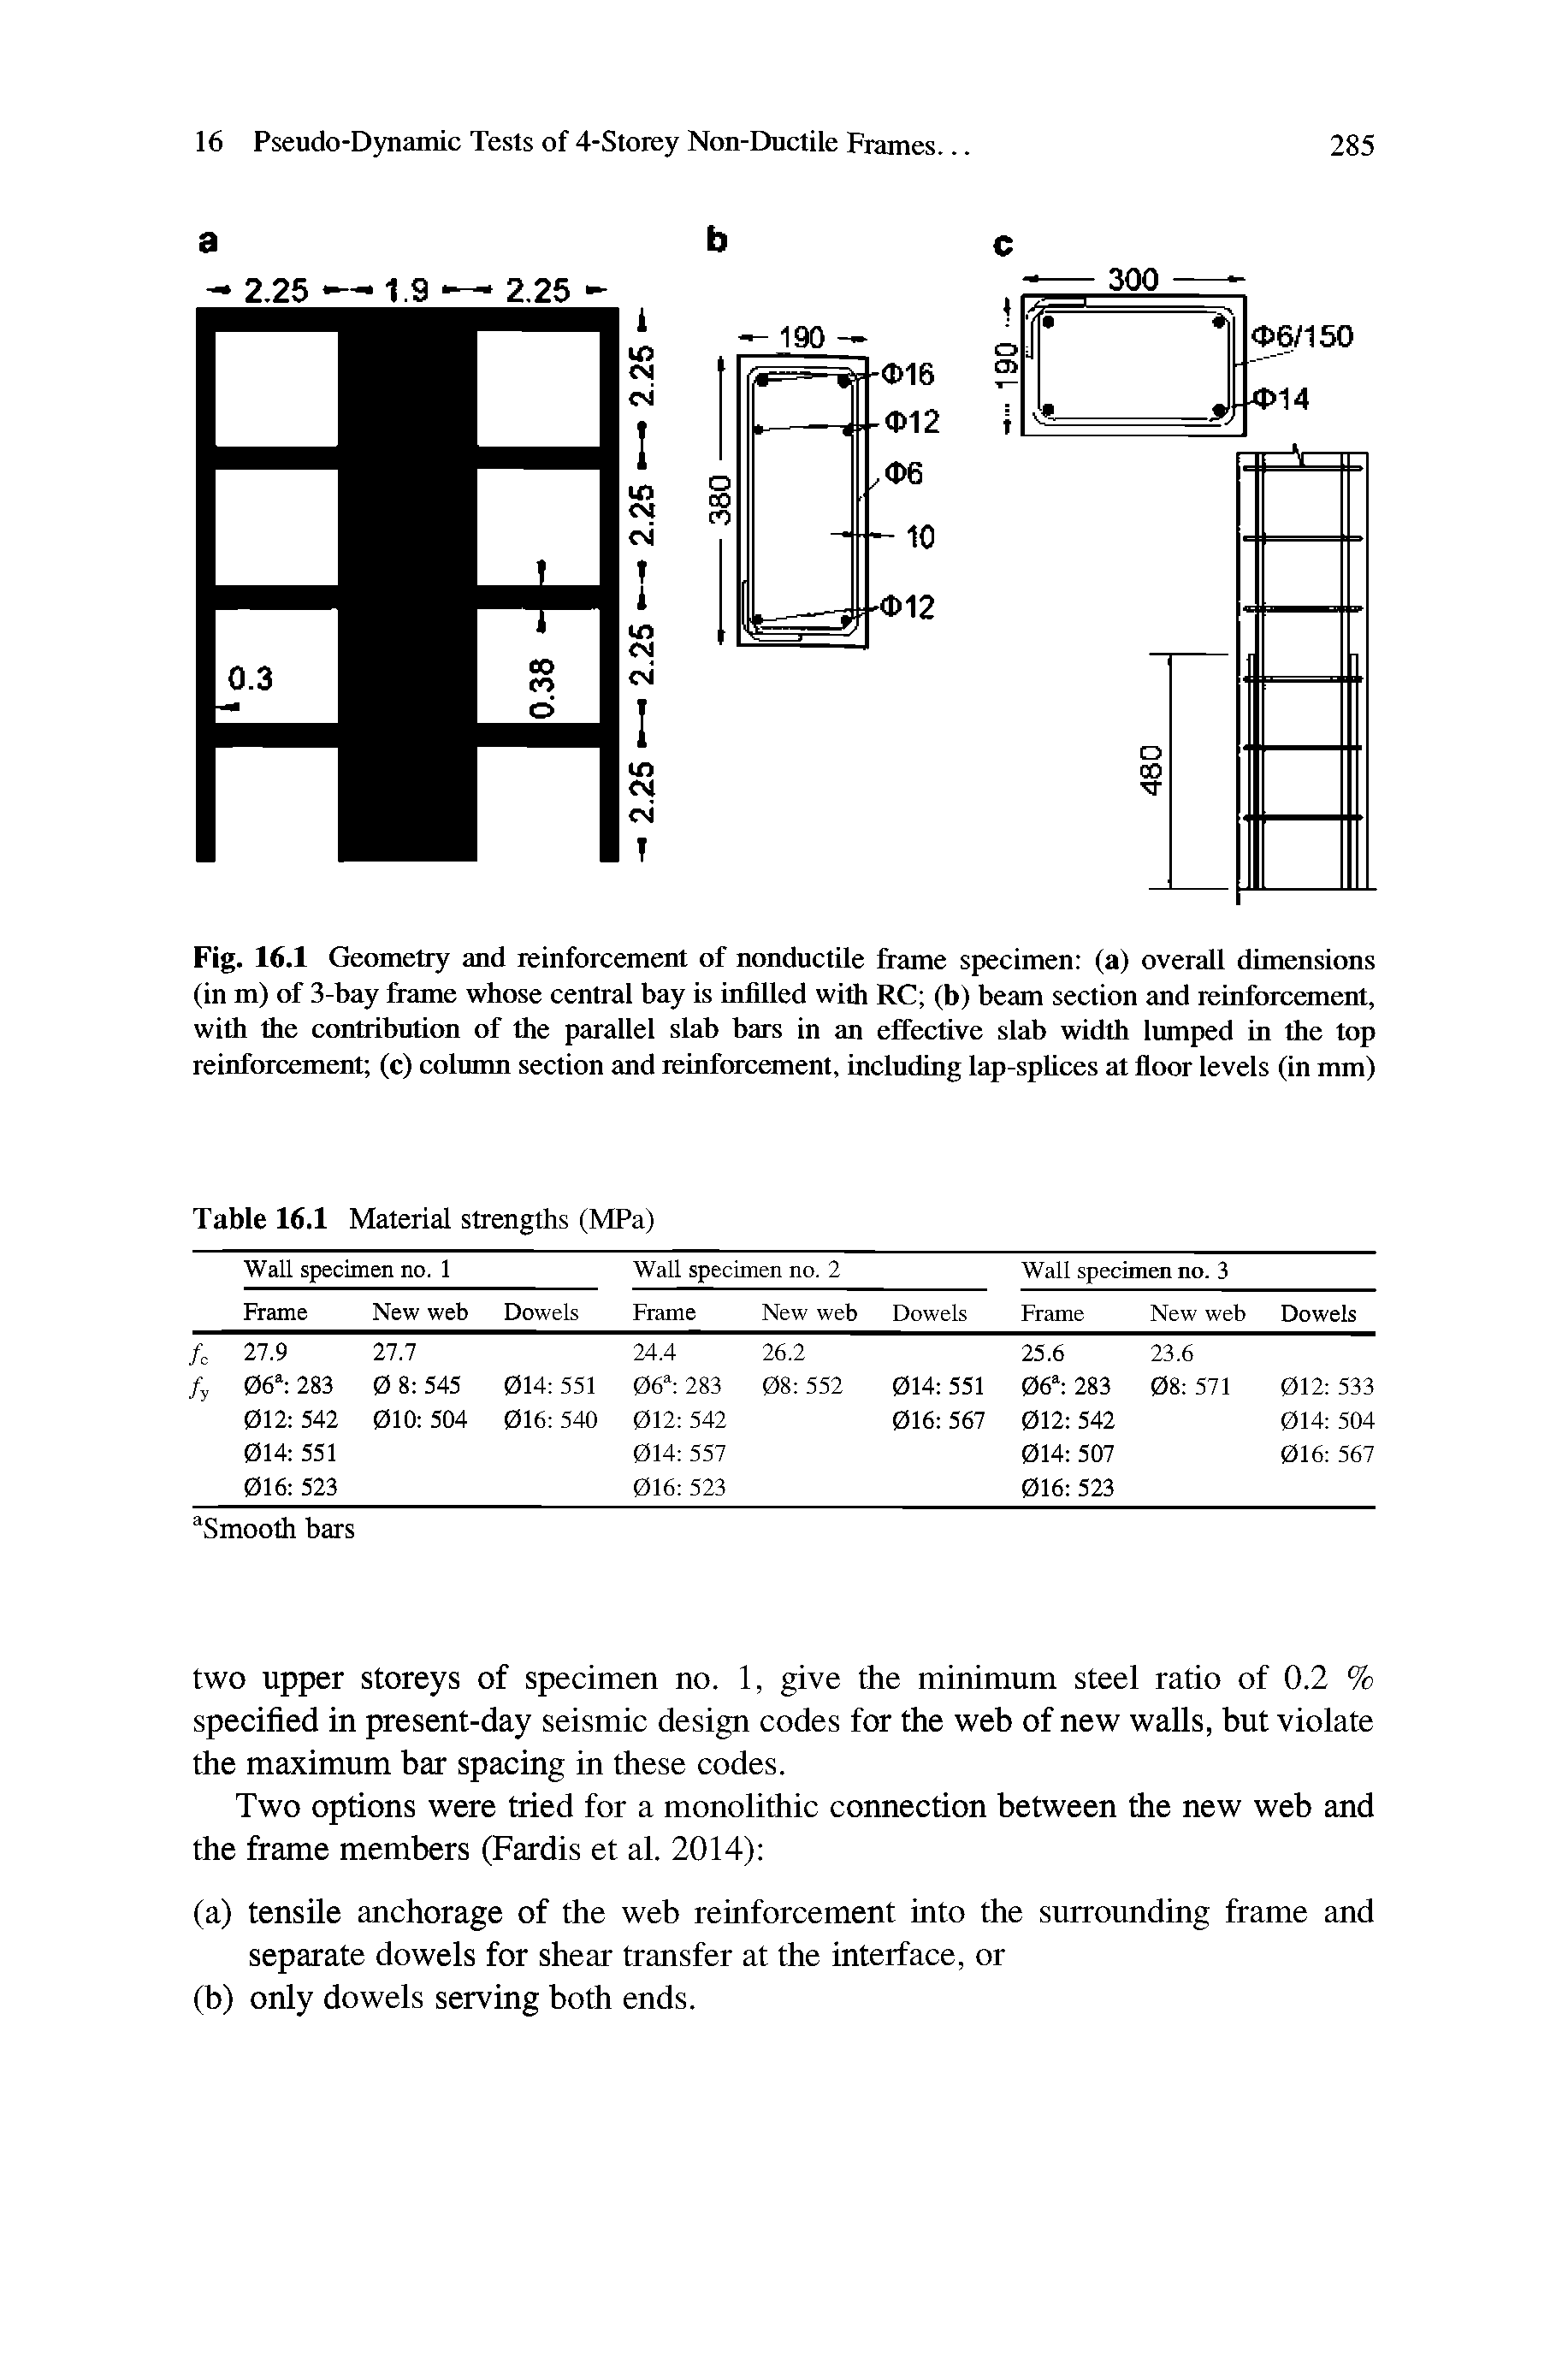 Fig. 16.1 Geometry and reinforcement of nonductile frame specimen (a) overall dimensions (in m) of 3-bay frame whose central bay is infilled with RC (b) beam section and reinforcement, with the contribution of the parallel slab bars in an effective slab width lumped in the top reinforcement (c) colunm section and reinfOTcanent, including lap-splices at floor levels (in mm)...